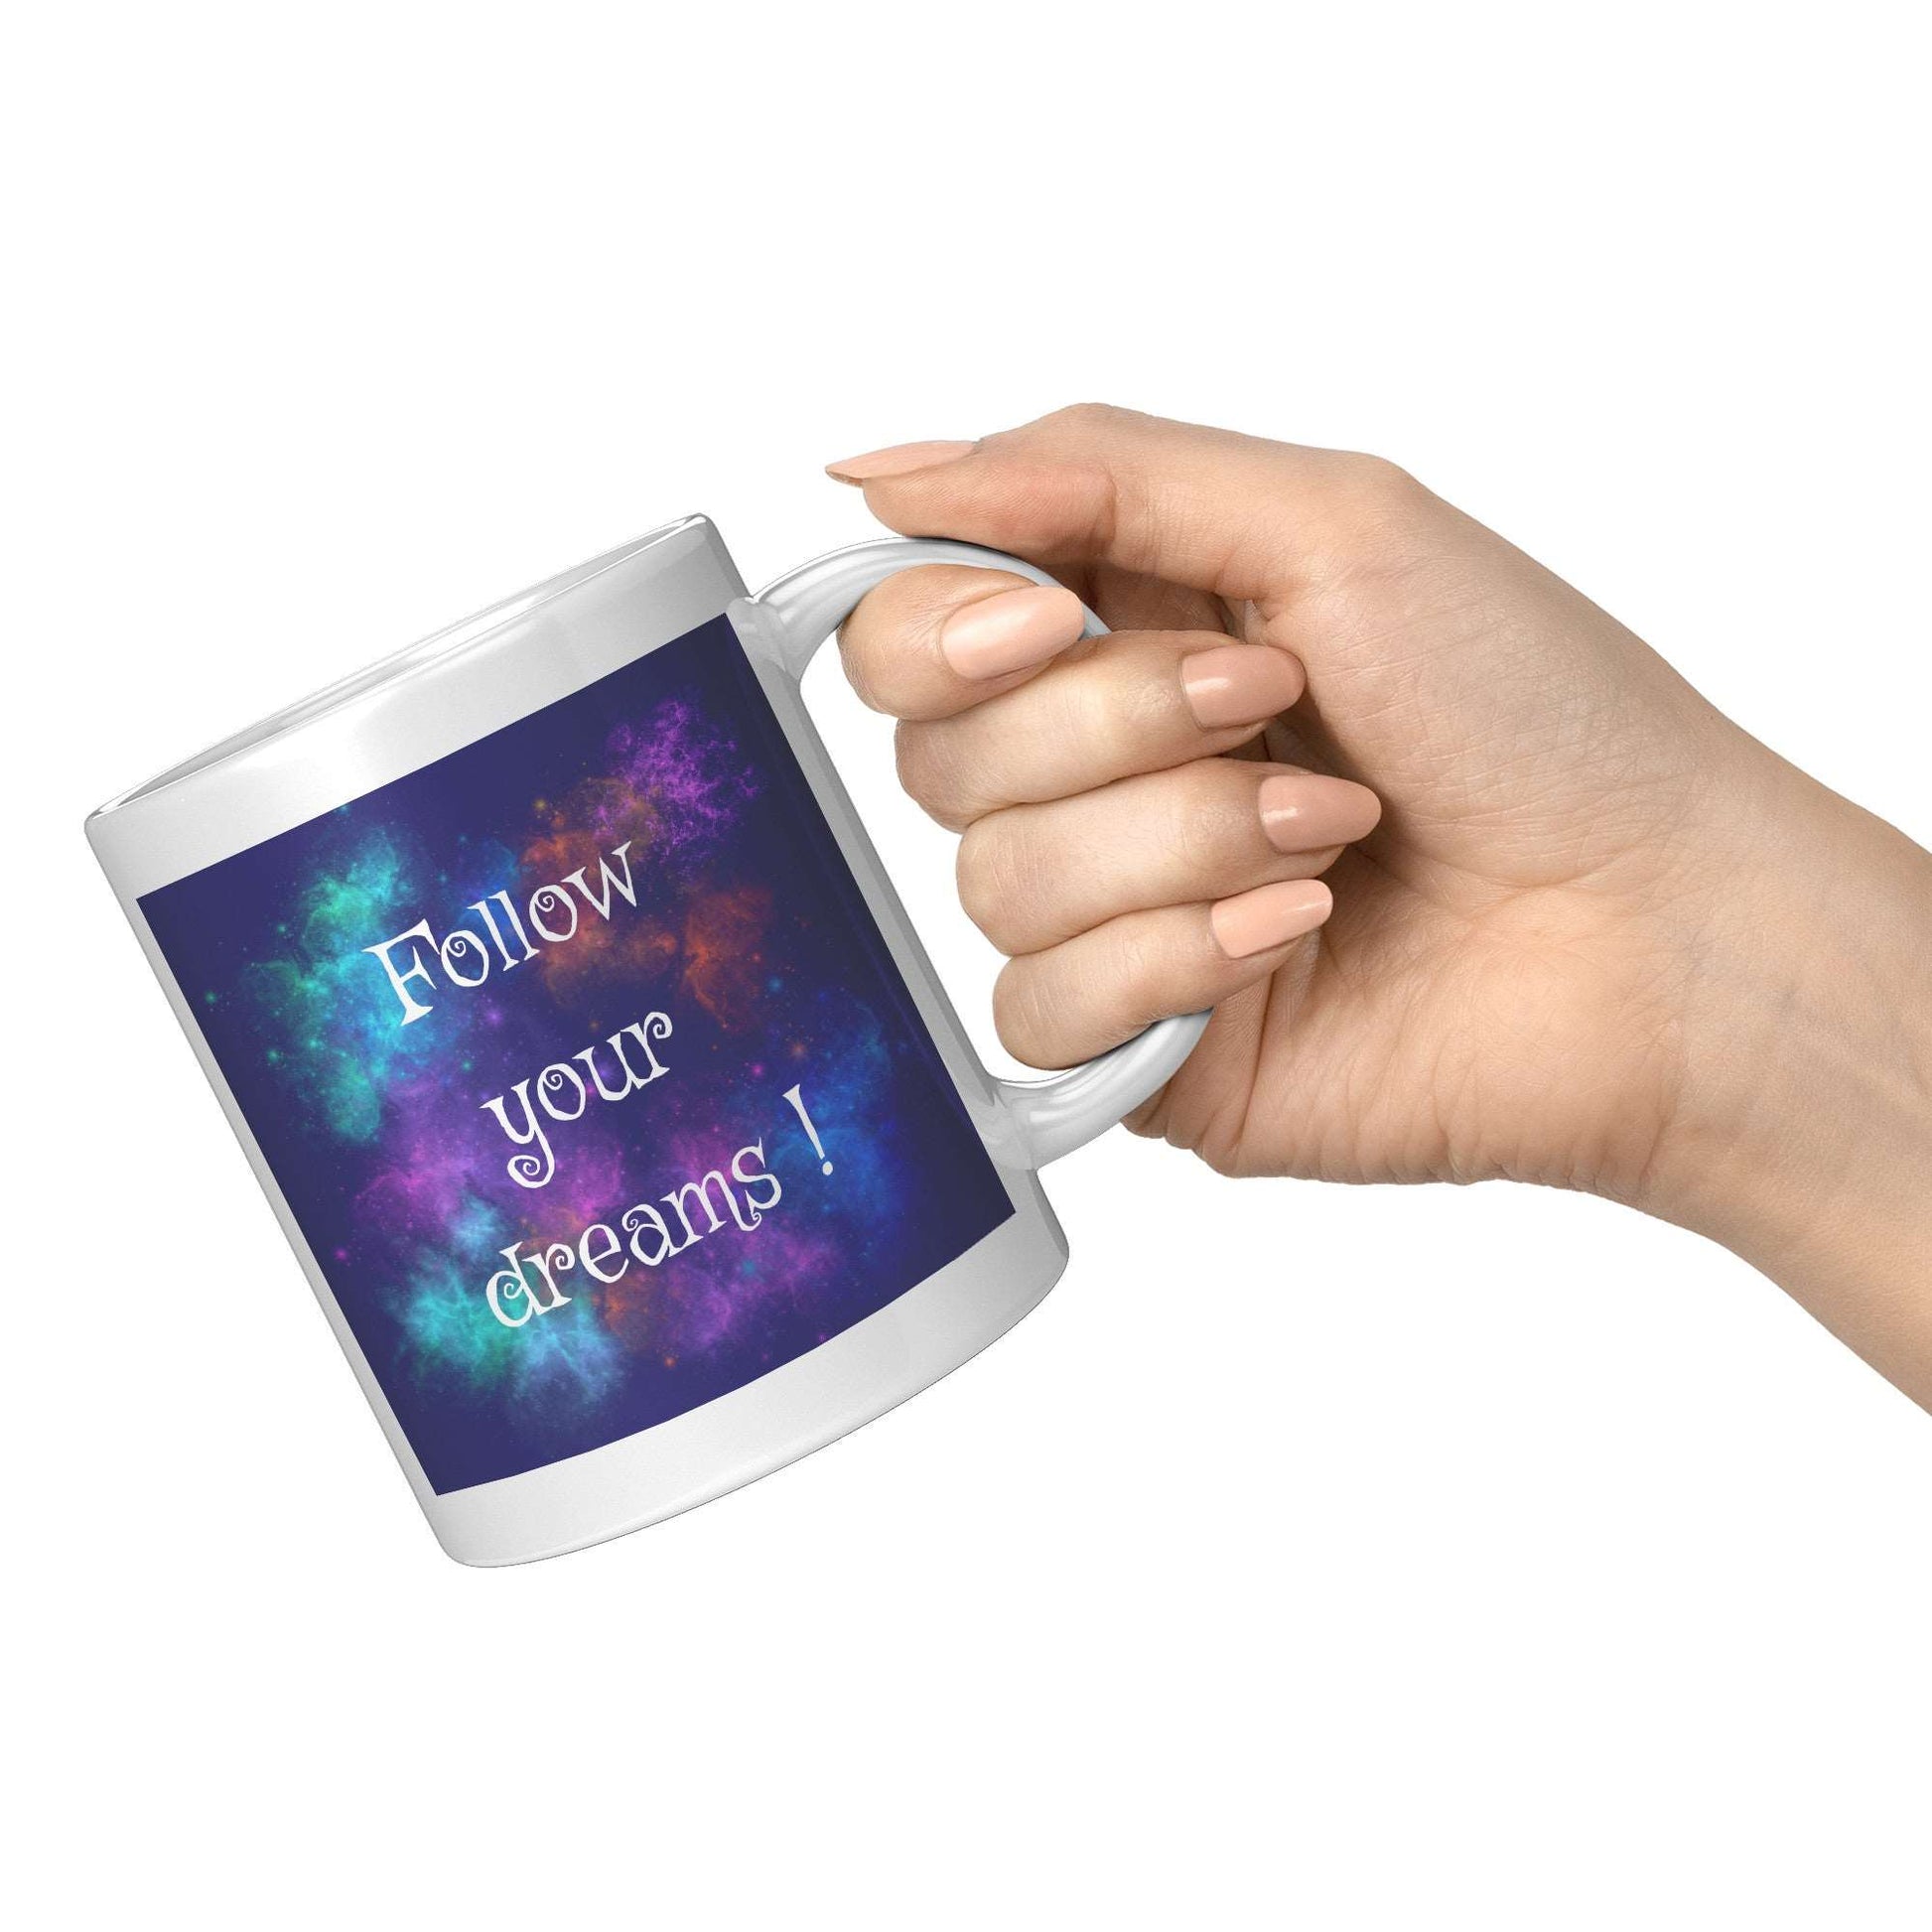 Lucy and the Enchanted Forest Mug 11 oz